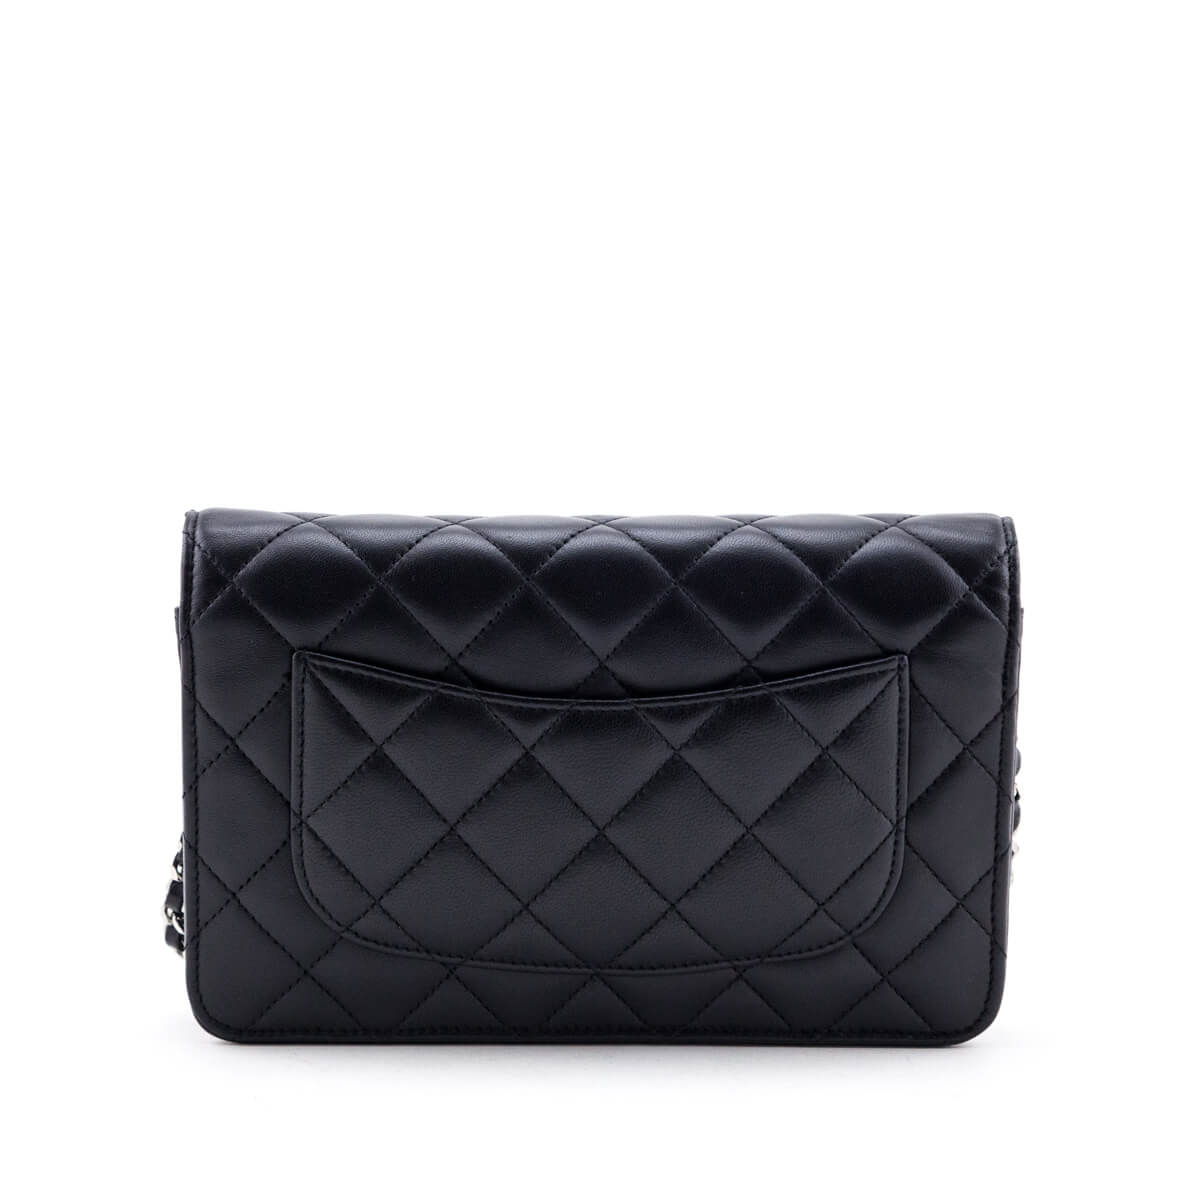 Chanel Black Quilted Lambskin Classic Wallet On Chain - Love that Bag etc - Preowned Authentic Designer Handbags & Preloved Fashions